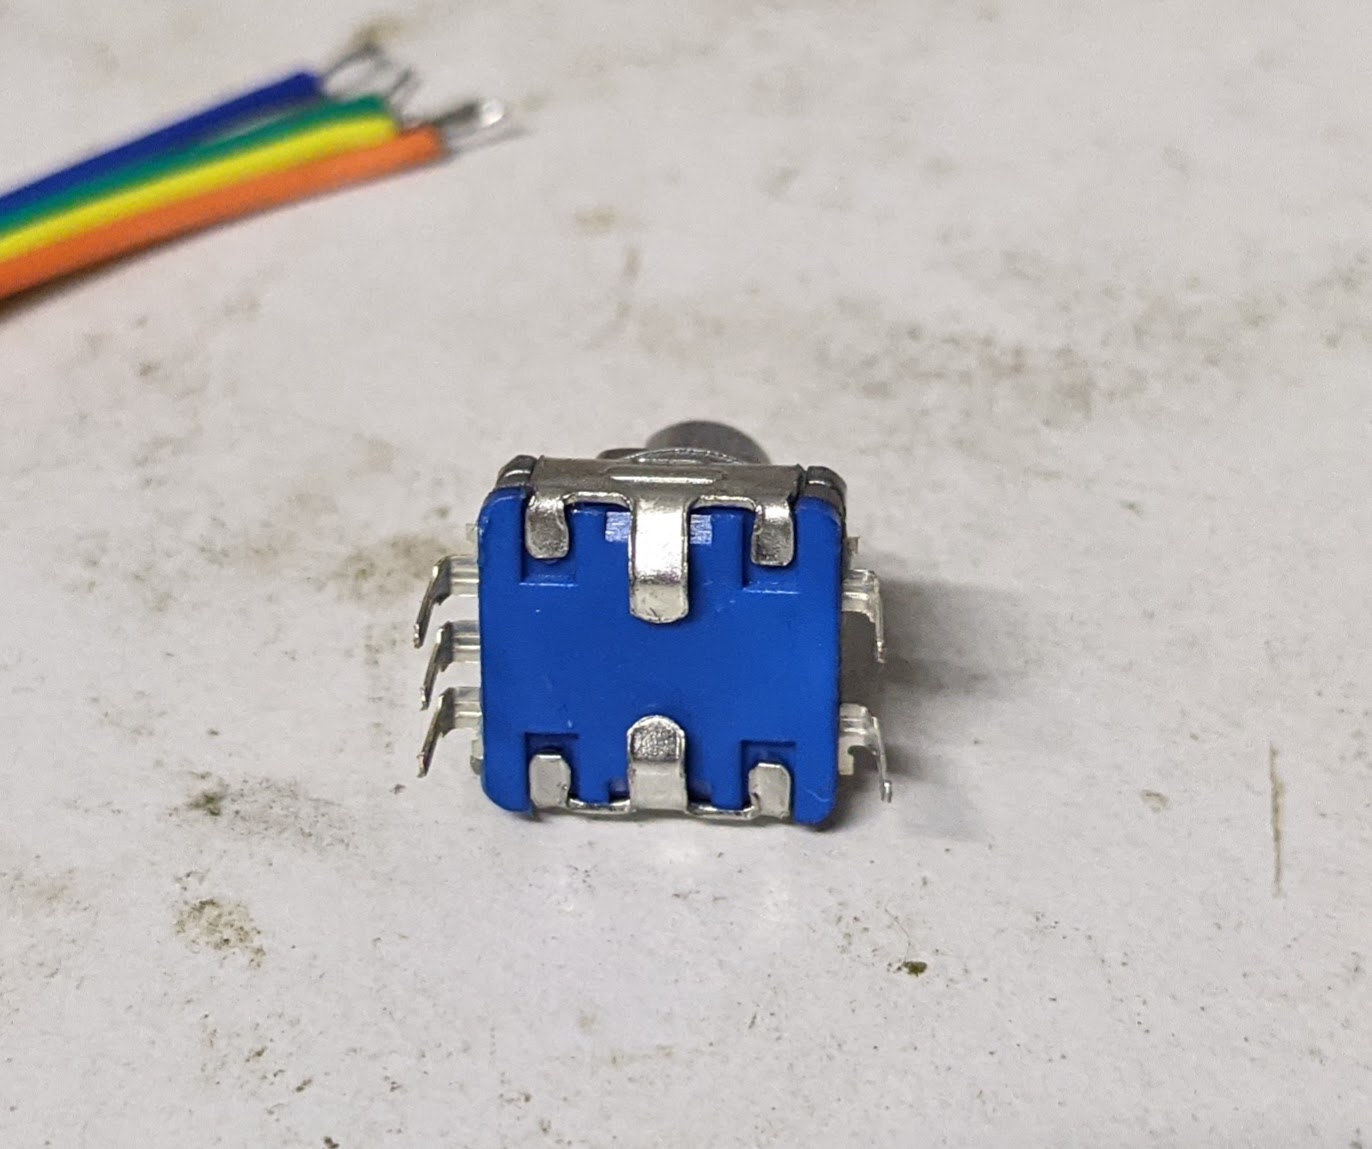 Bending the mounting tabs on the rotary encoder